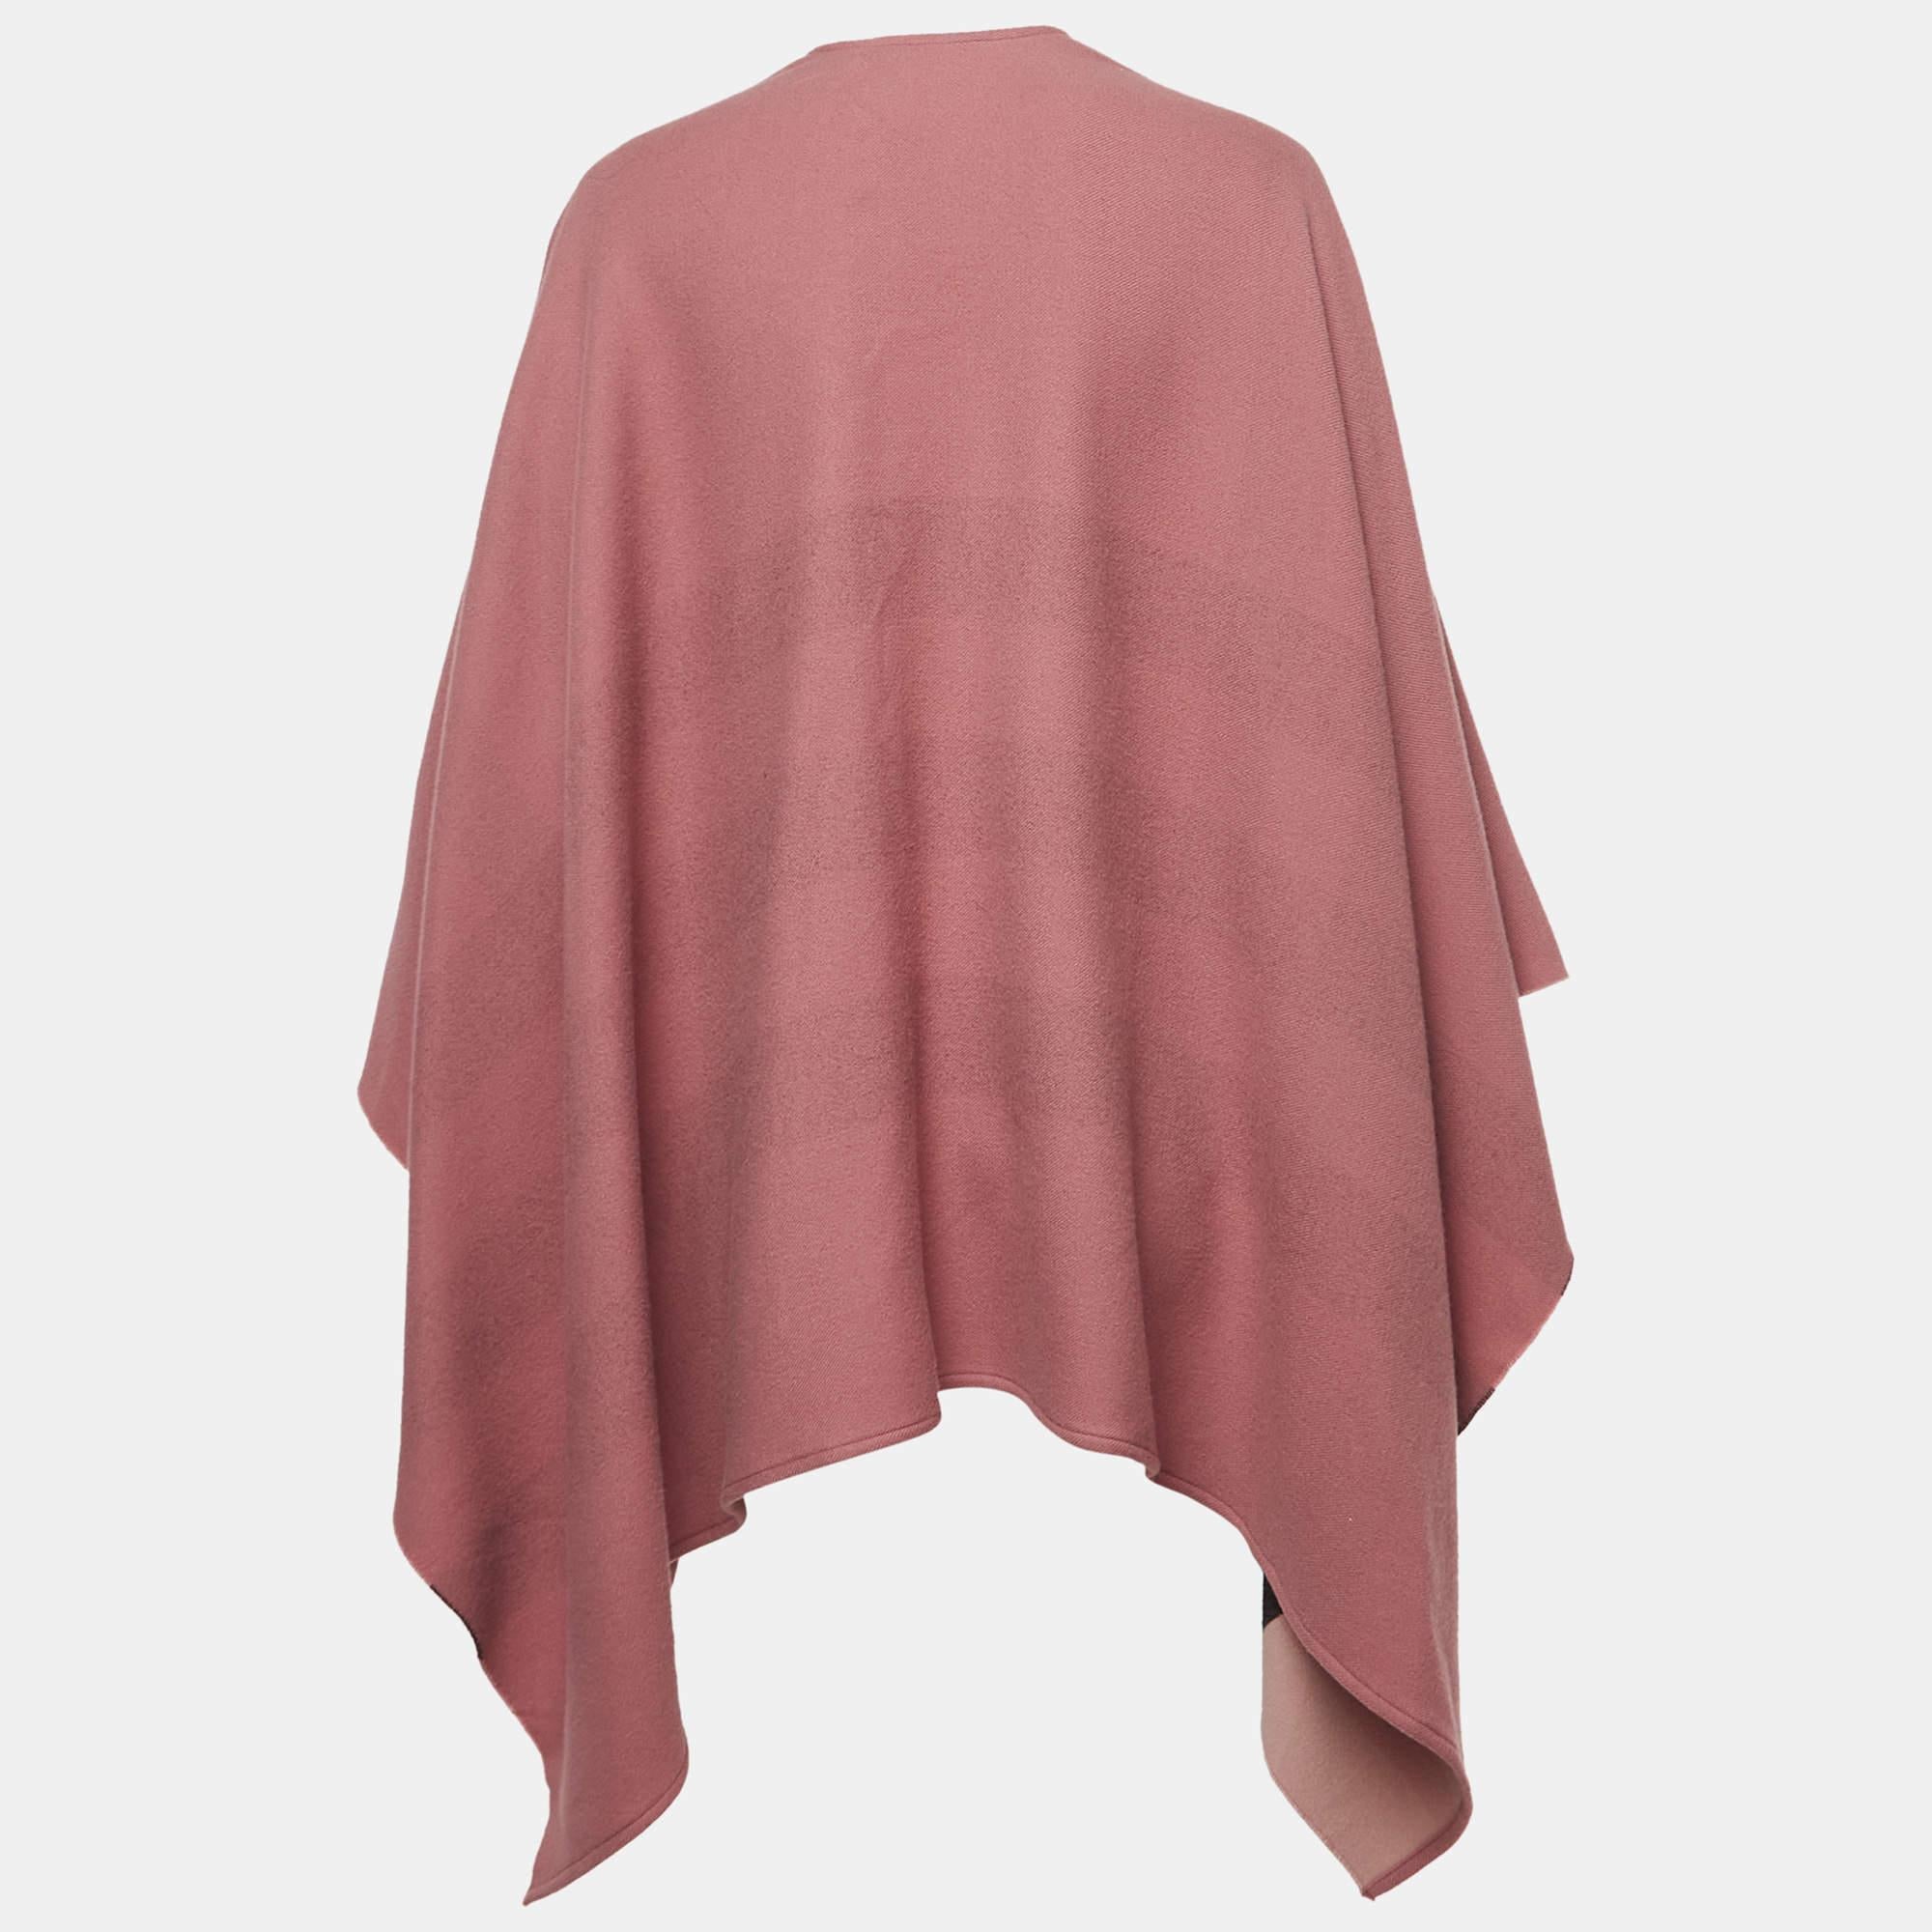 Flattering and feminine, this poncho definitely needs to be on your wishlist! It is made of smooth cashmere and flaunts a comfy silhouette. Pair it with jeans and block heels for a fashionable get-together.

Includes
The Luxury Closet Packaging